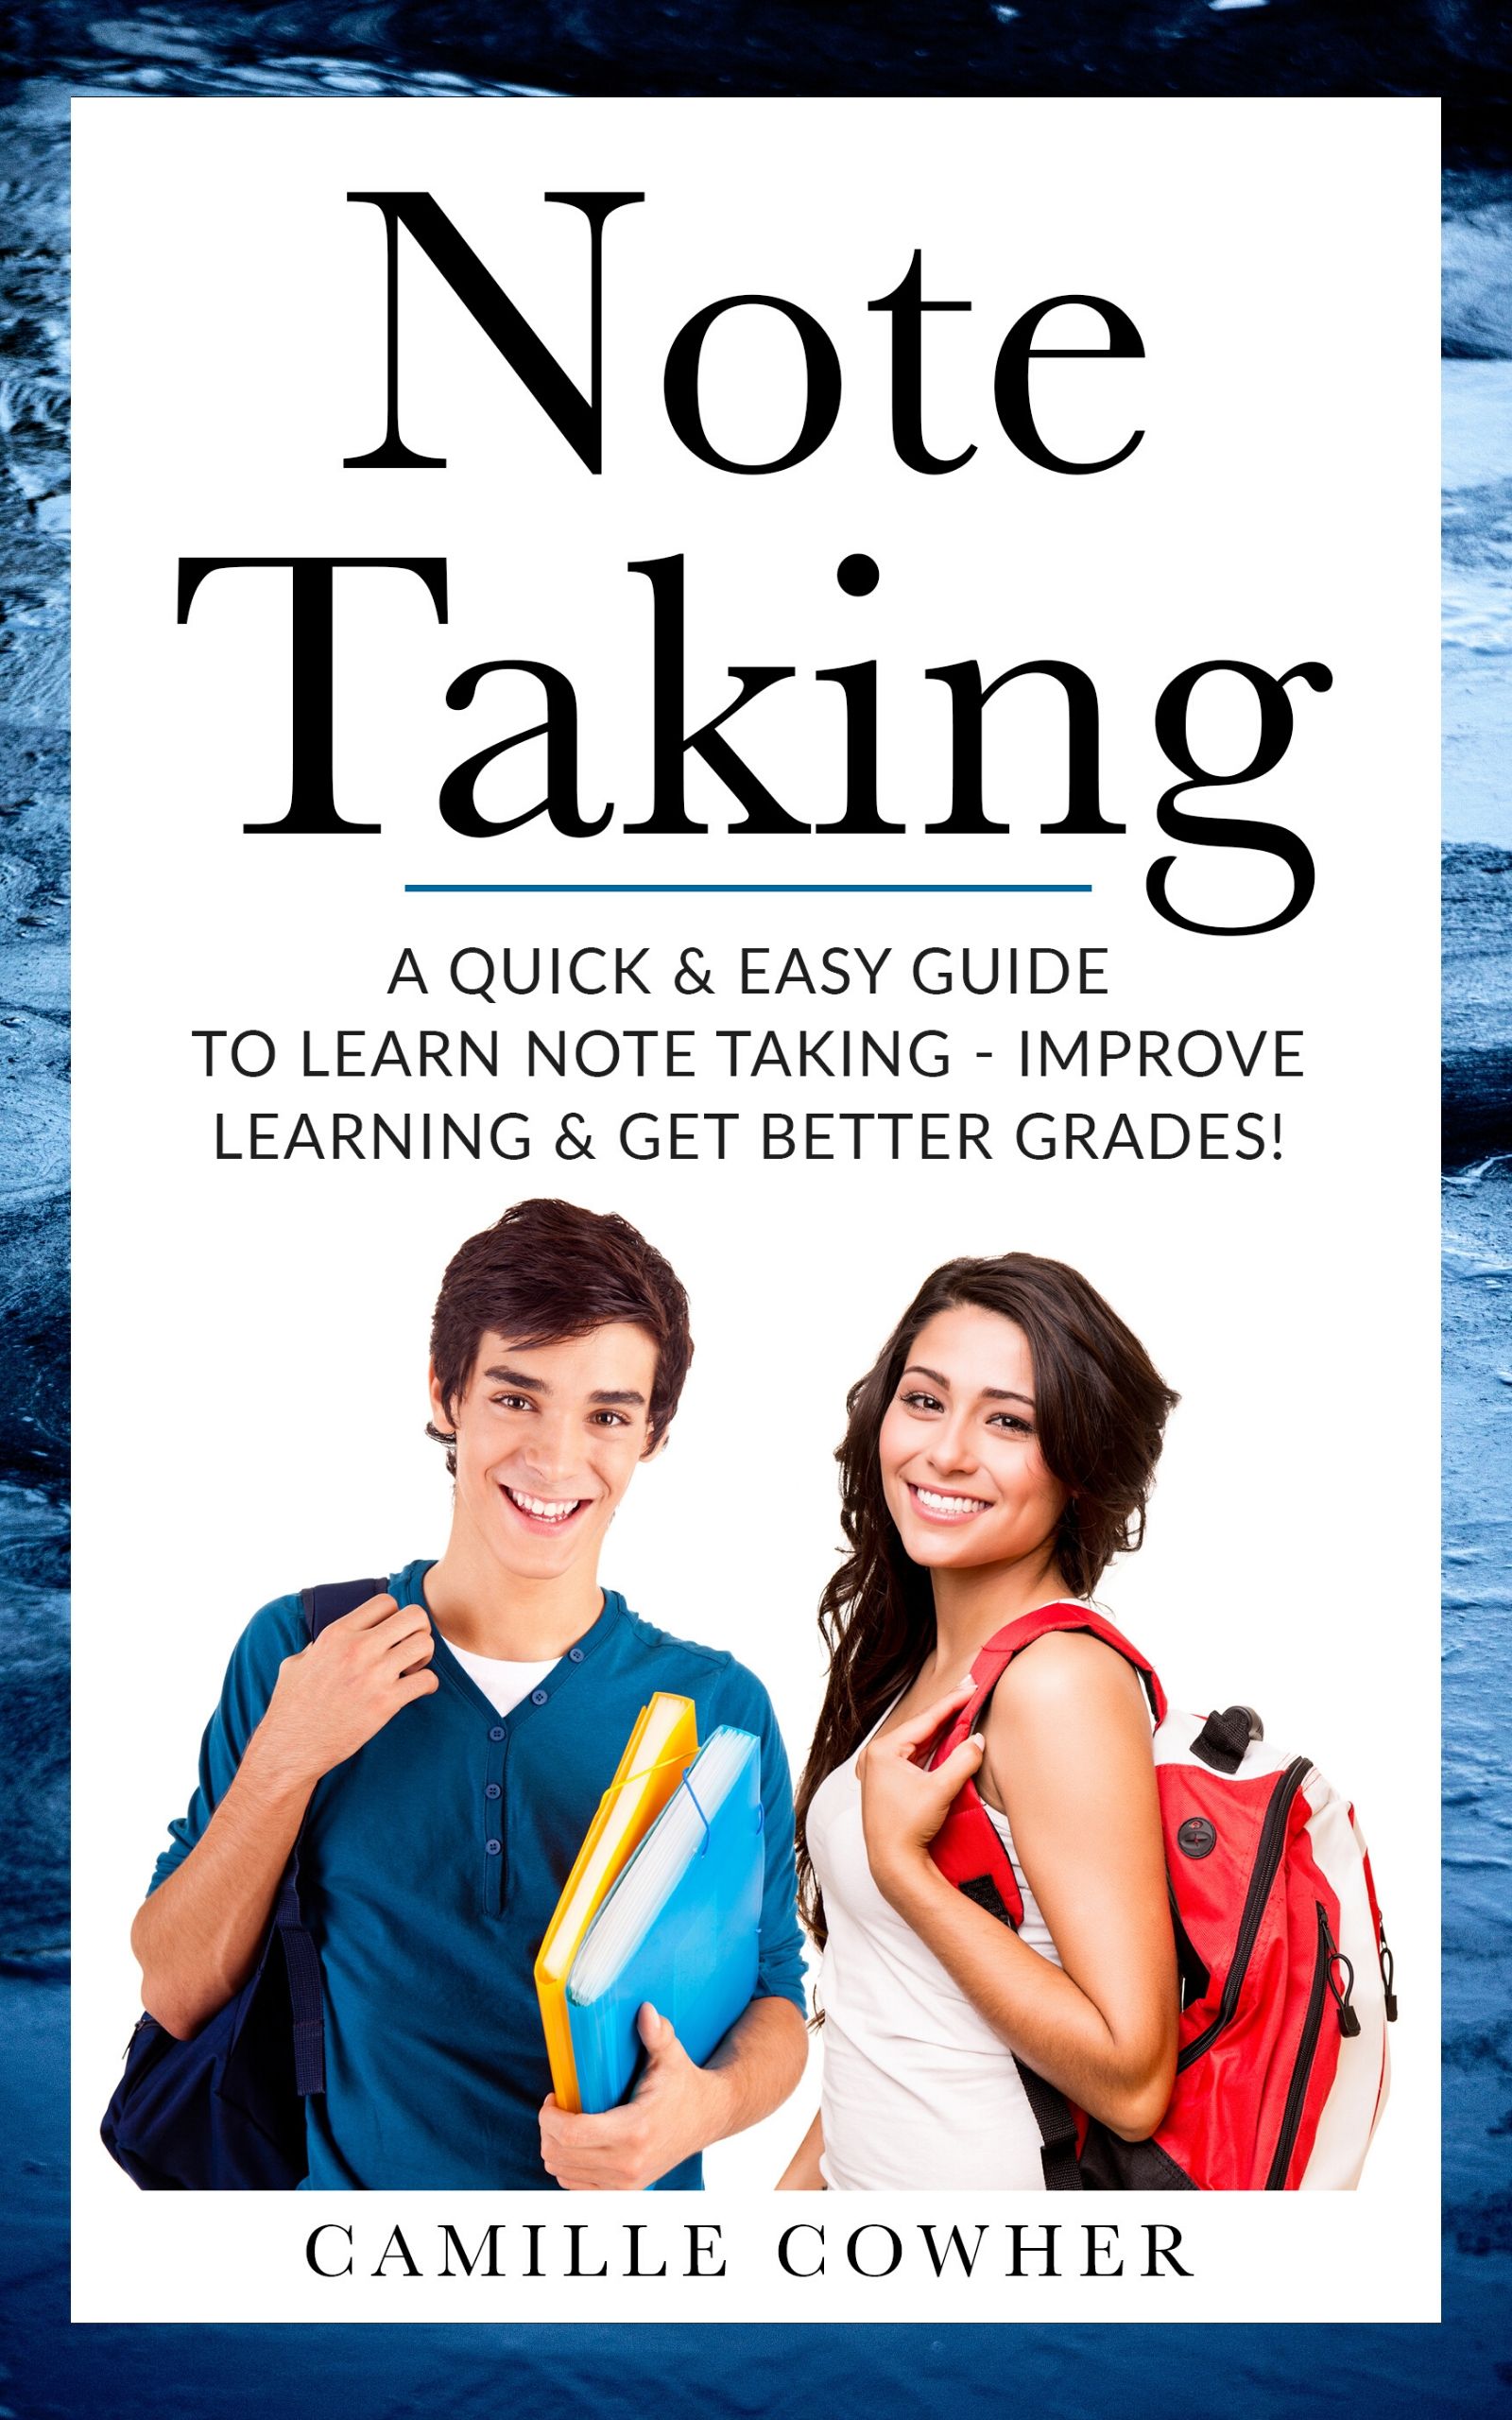 FREE: Note Taking A Fast & Easy Guide to Learn Note Taking Improve Learning & Get Better Grades by Camille Cowher